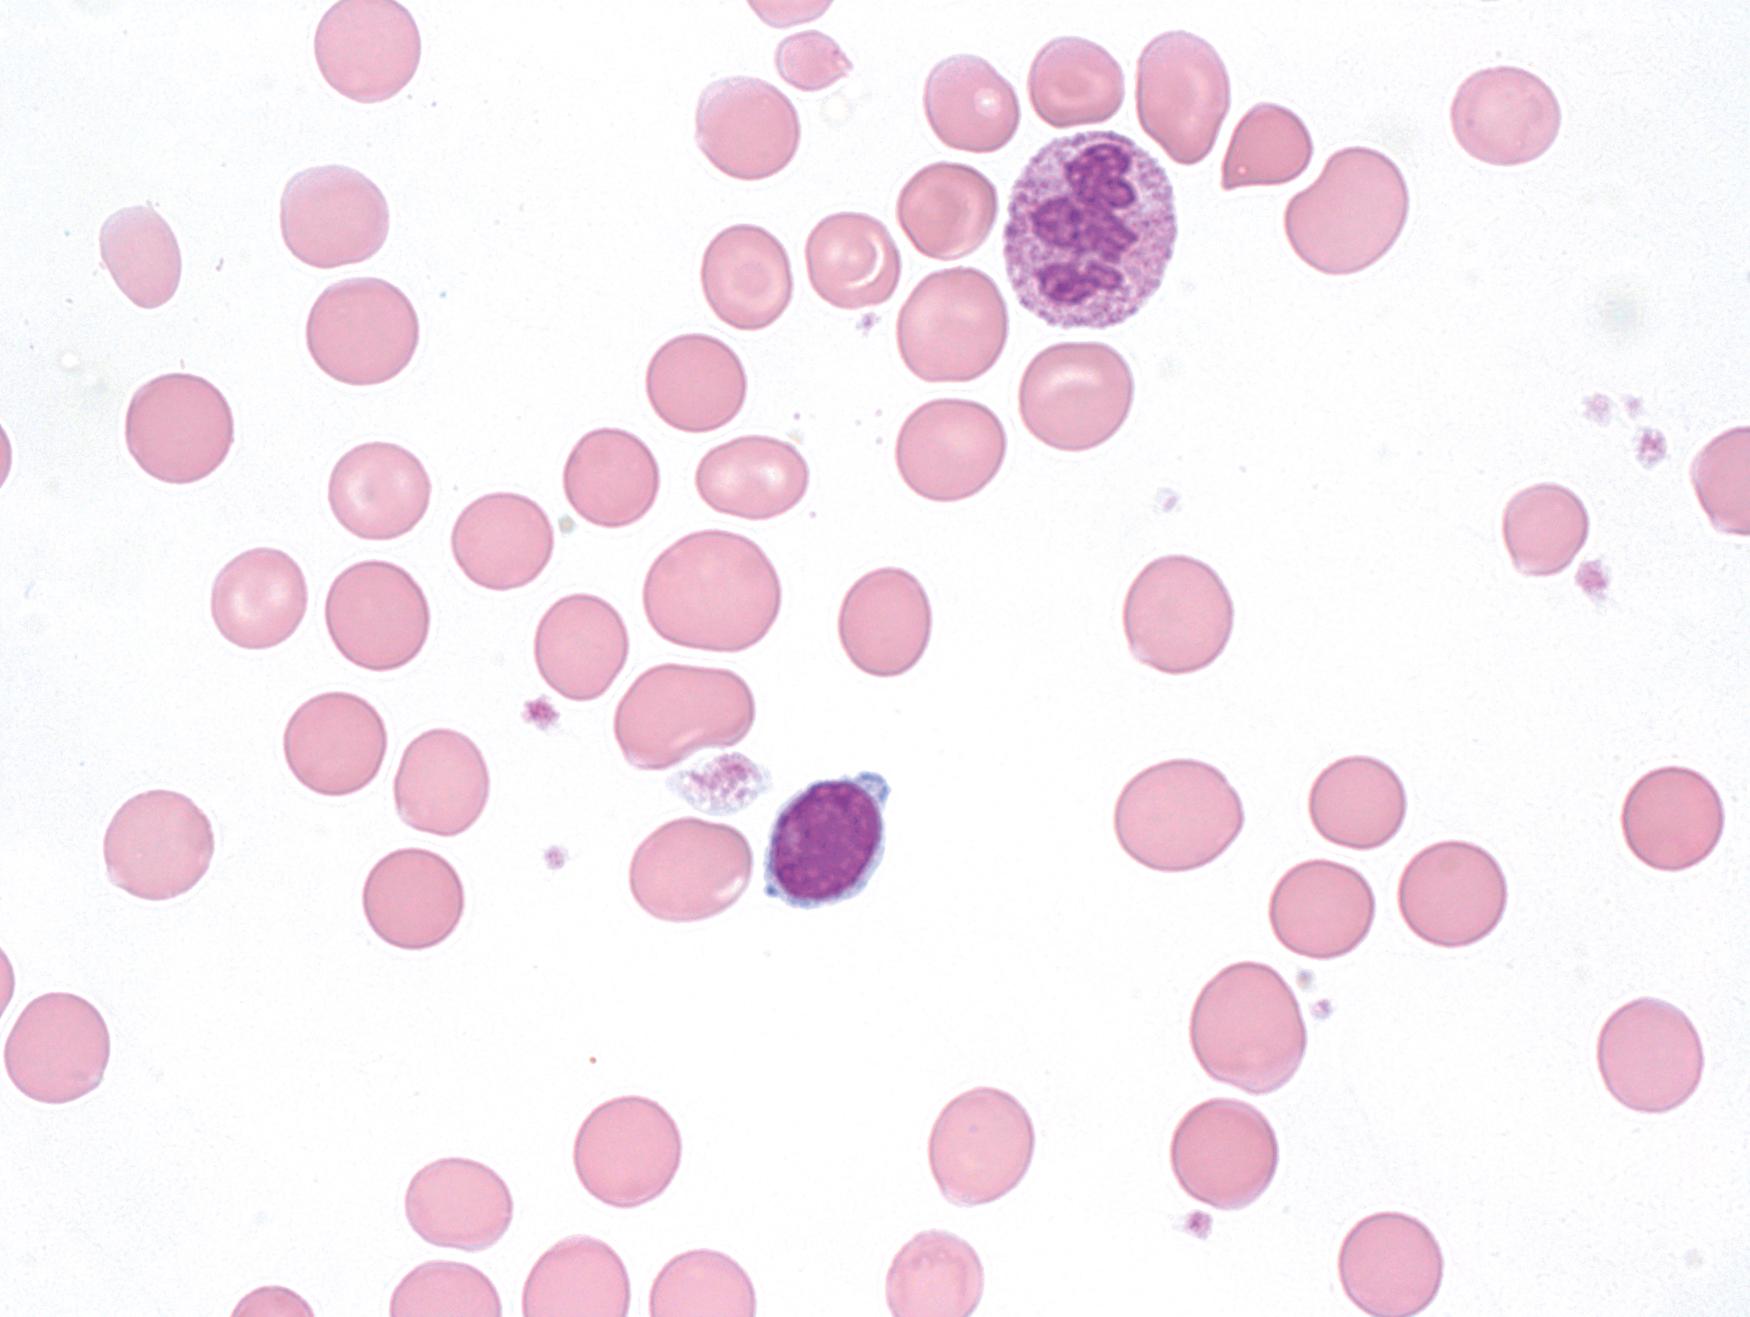 Fig. 4.5, Peripheral blood smear (×400) with moderate anisocytosis, occasional oval macrocytes, and hypersegmented neutrophils.